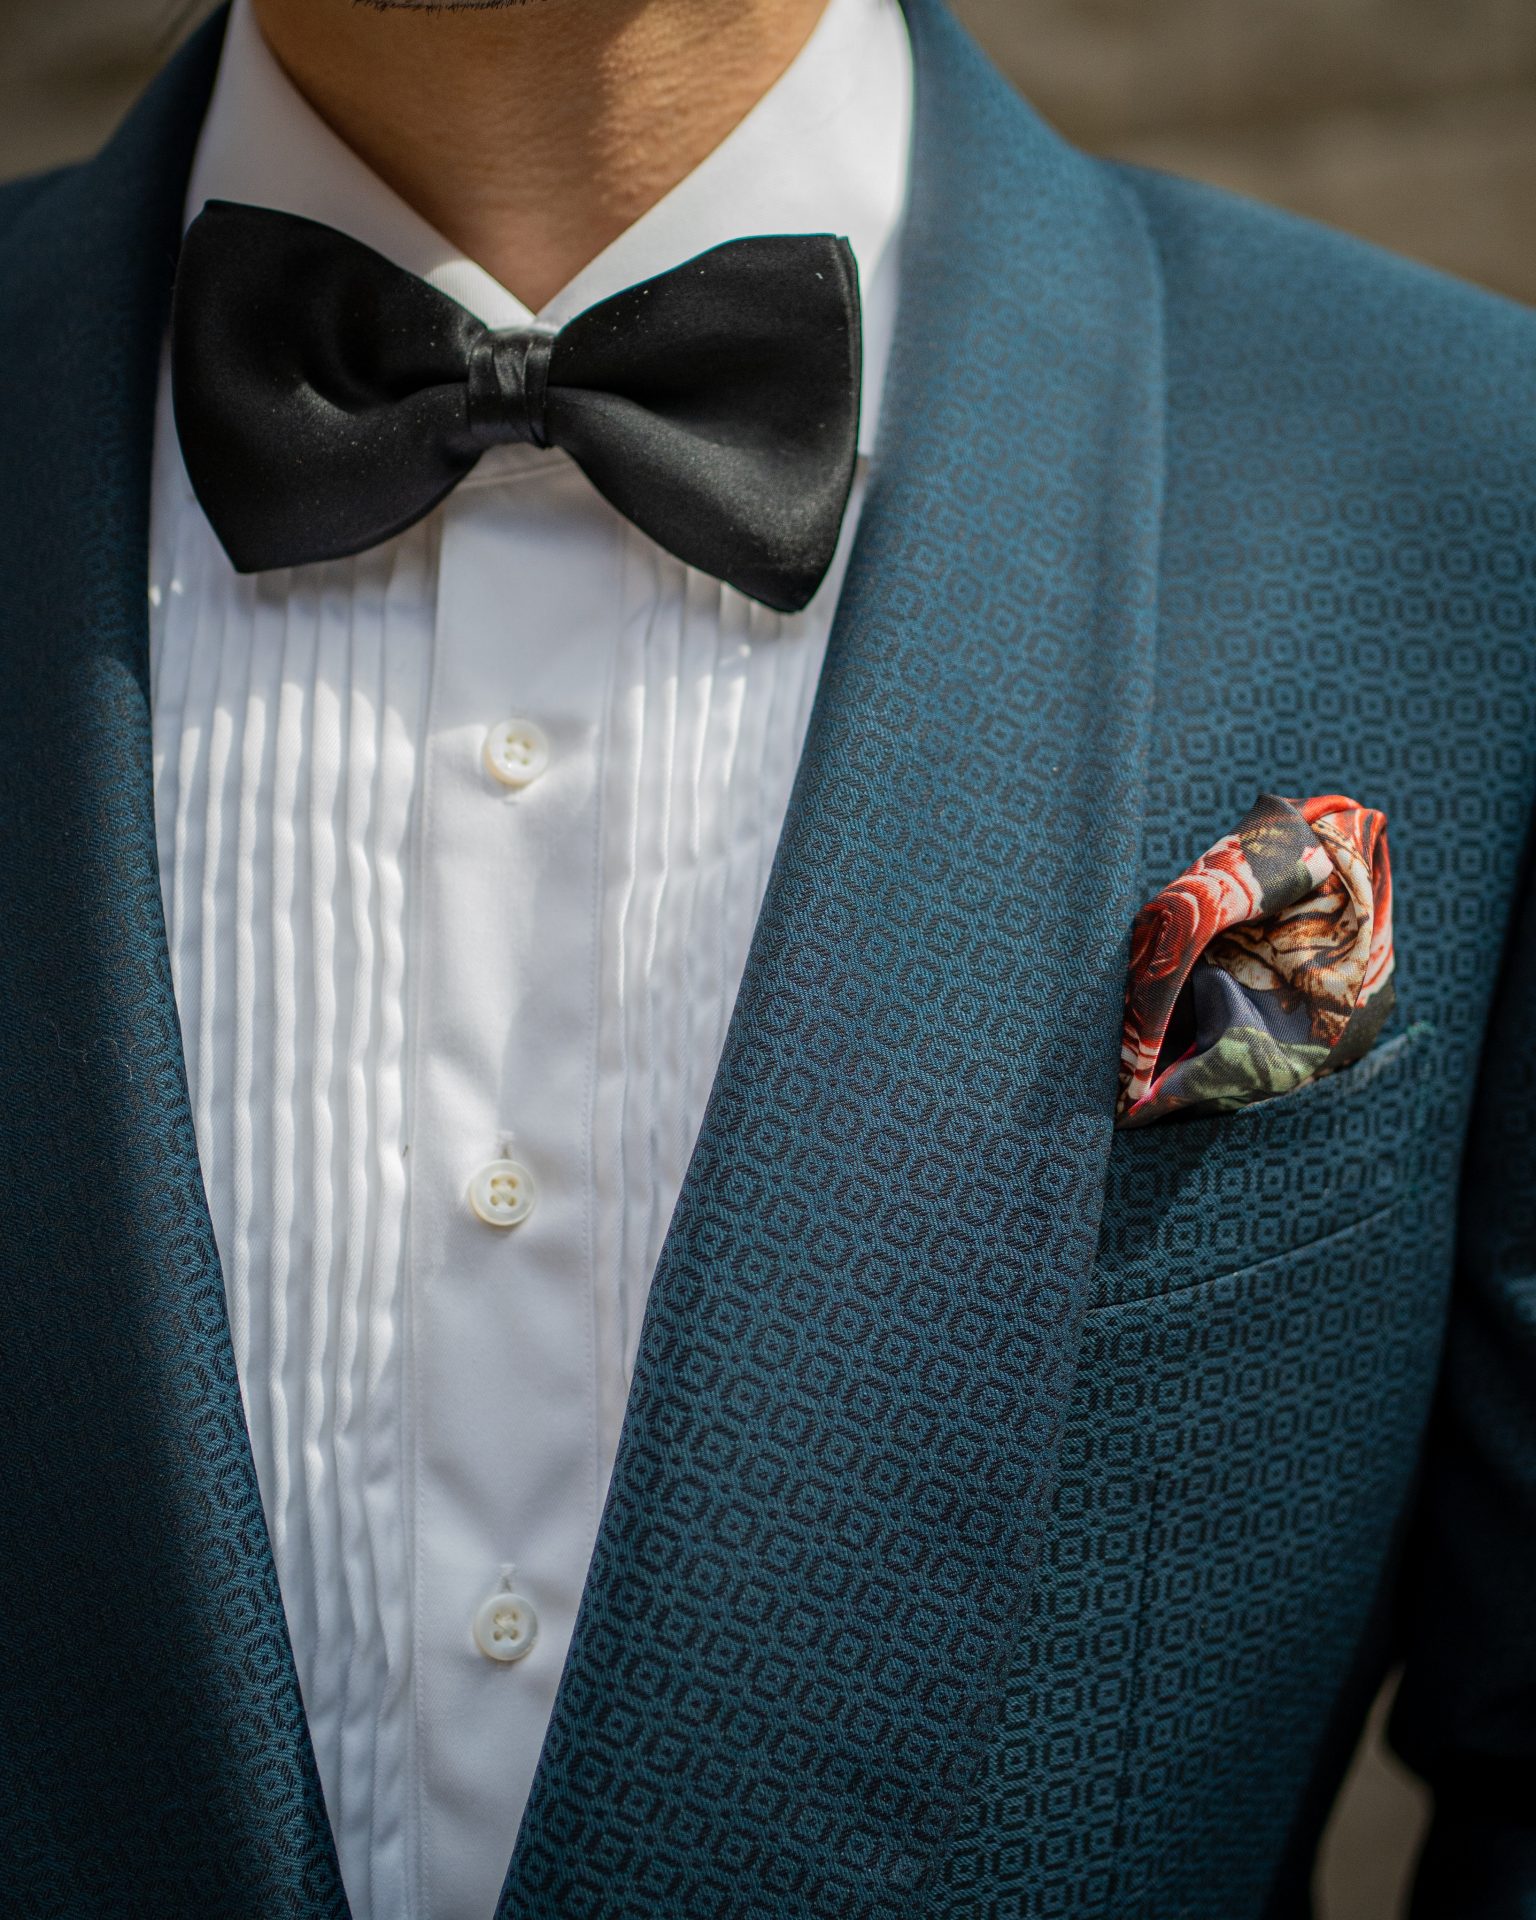 EVERYTHING YOU NEED TO KNOW ABOUT POCKET SQUARES